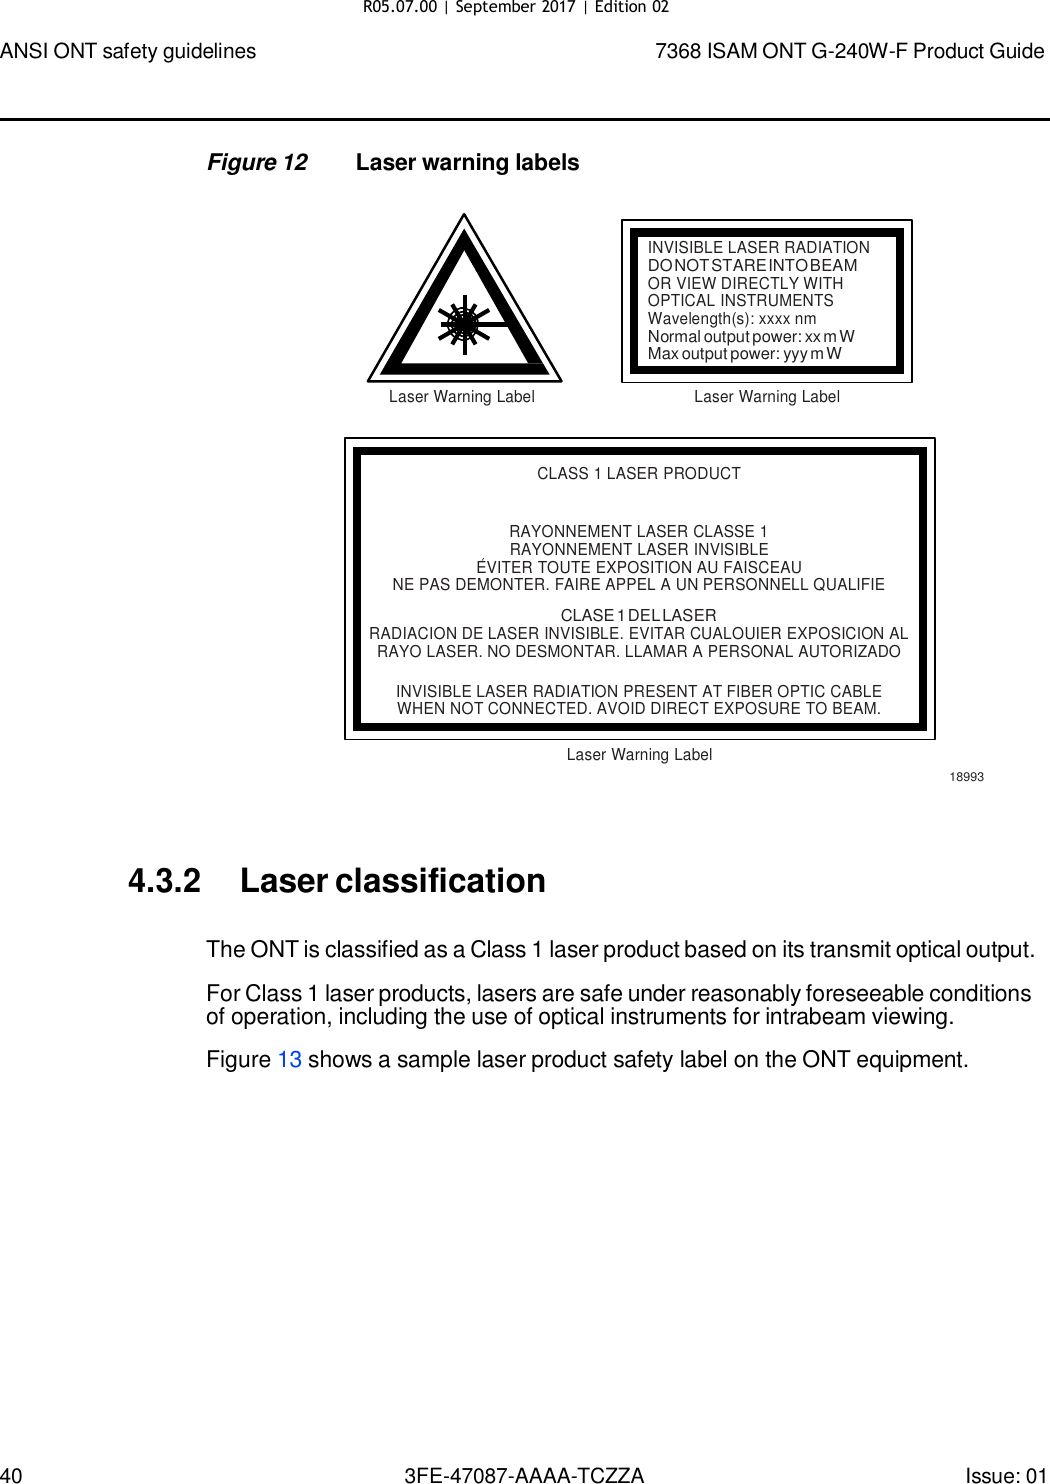 Page 37 of Nokia Bell G240WFV2 7368 ISAM GPON ONU User Manual 7368 ISAM ONT G 240W F Product Guide